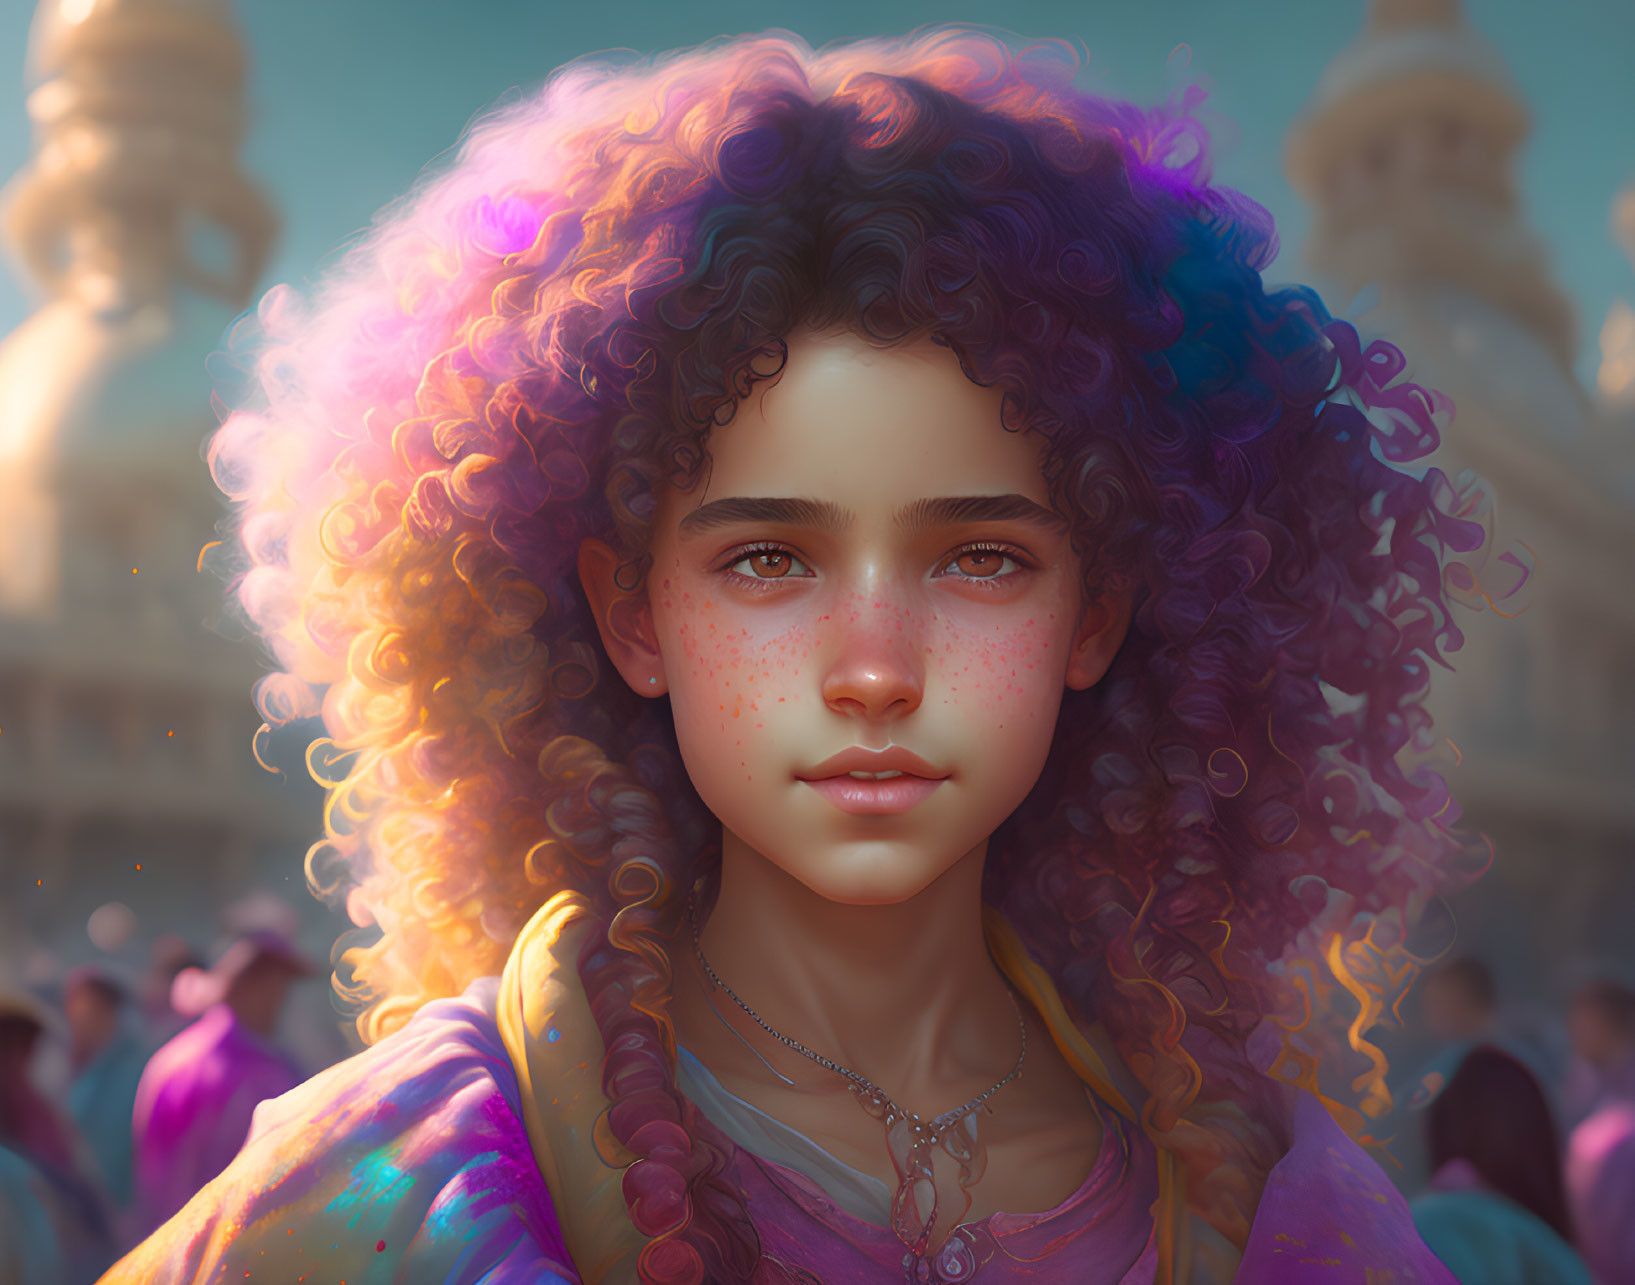 Vibrant digital artwork featuring young girl with purple curly hair